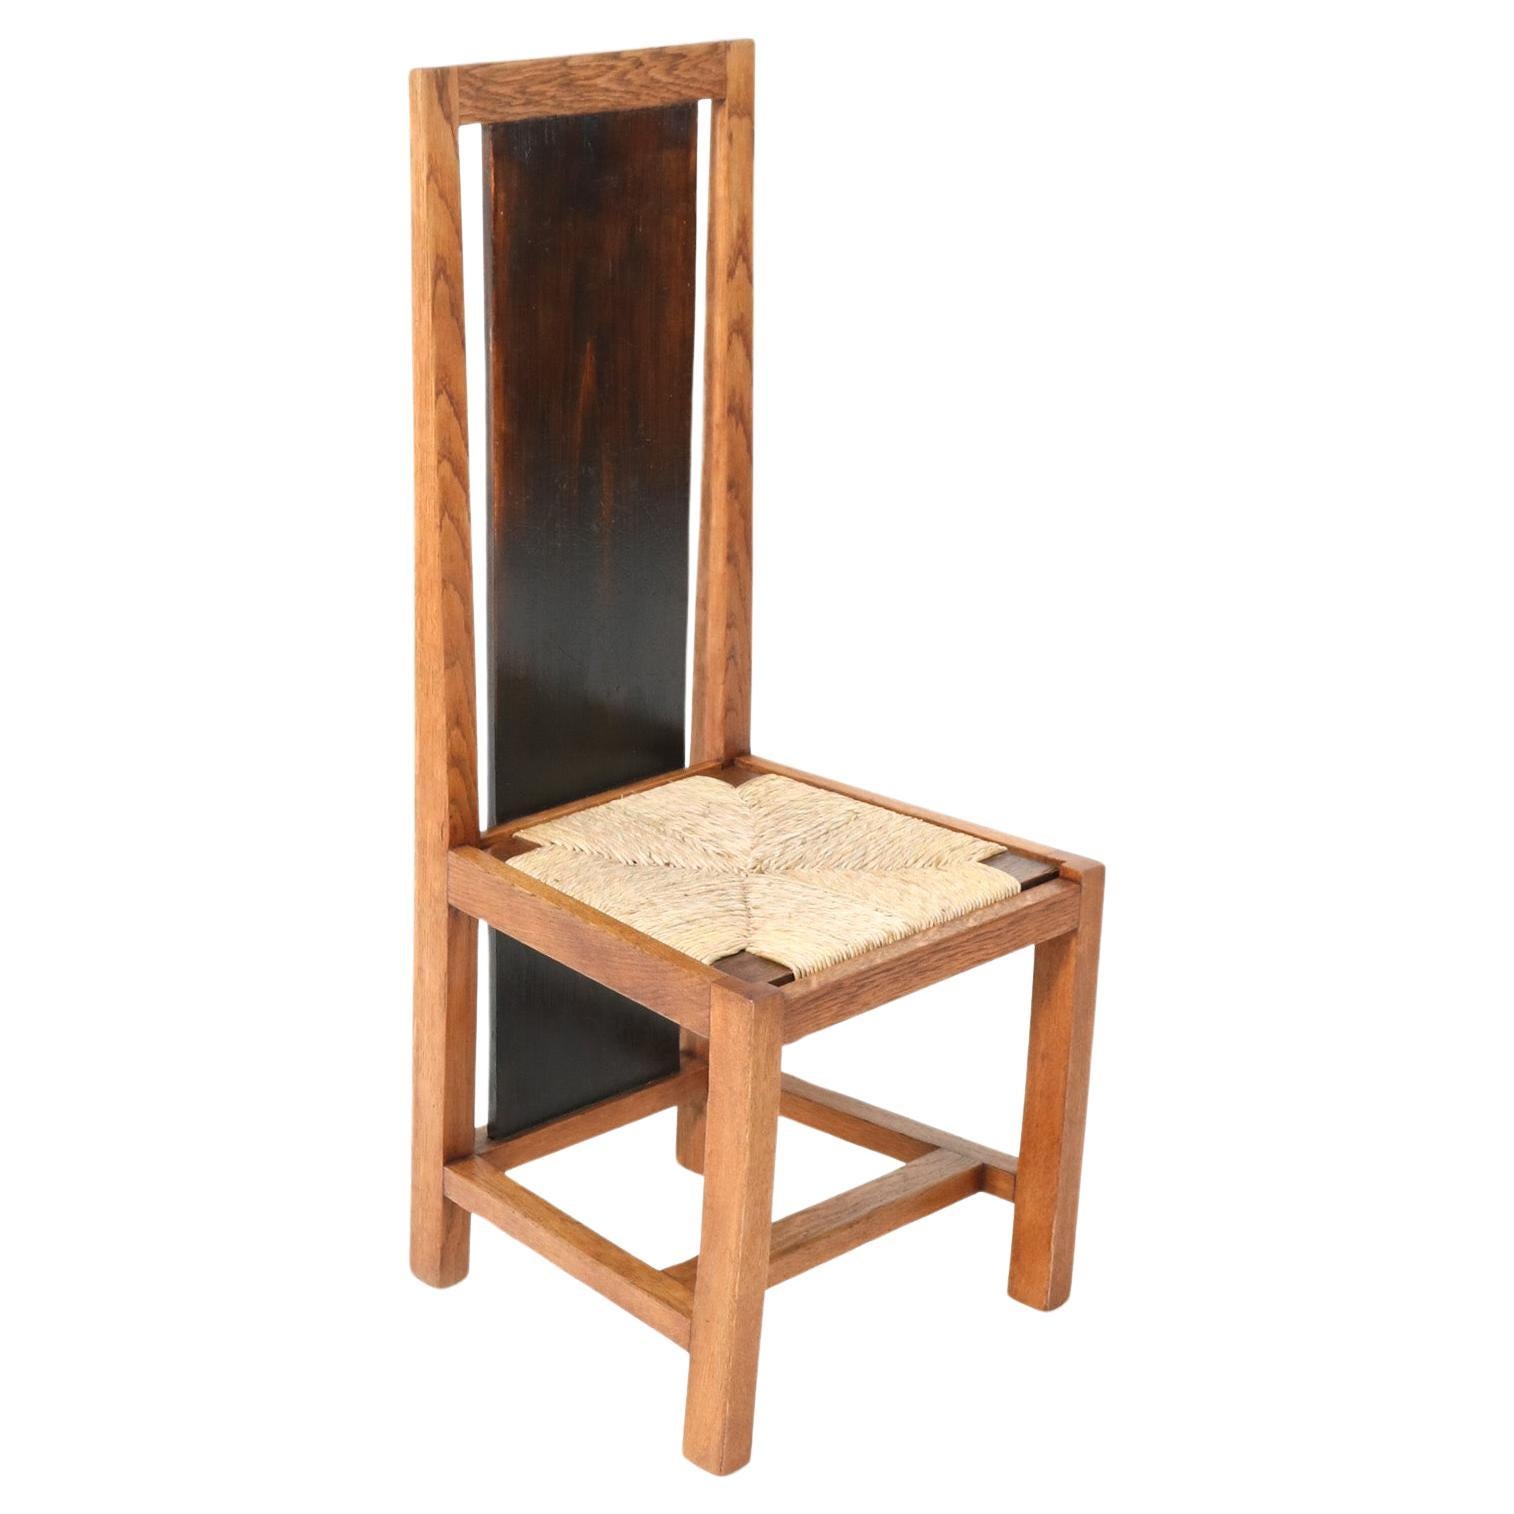  Art Deco Modernist Oak High Back Chair by Cor Alons, 1923 For Sale